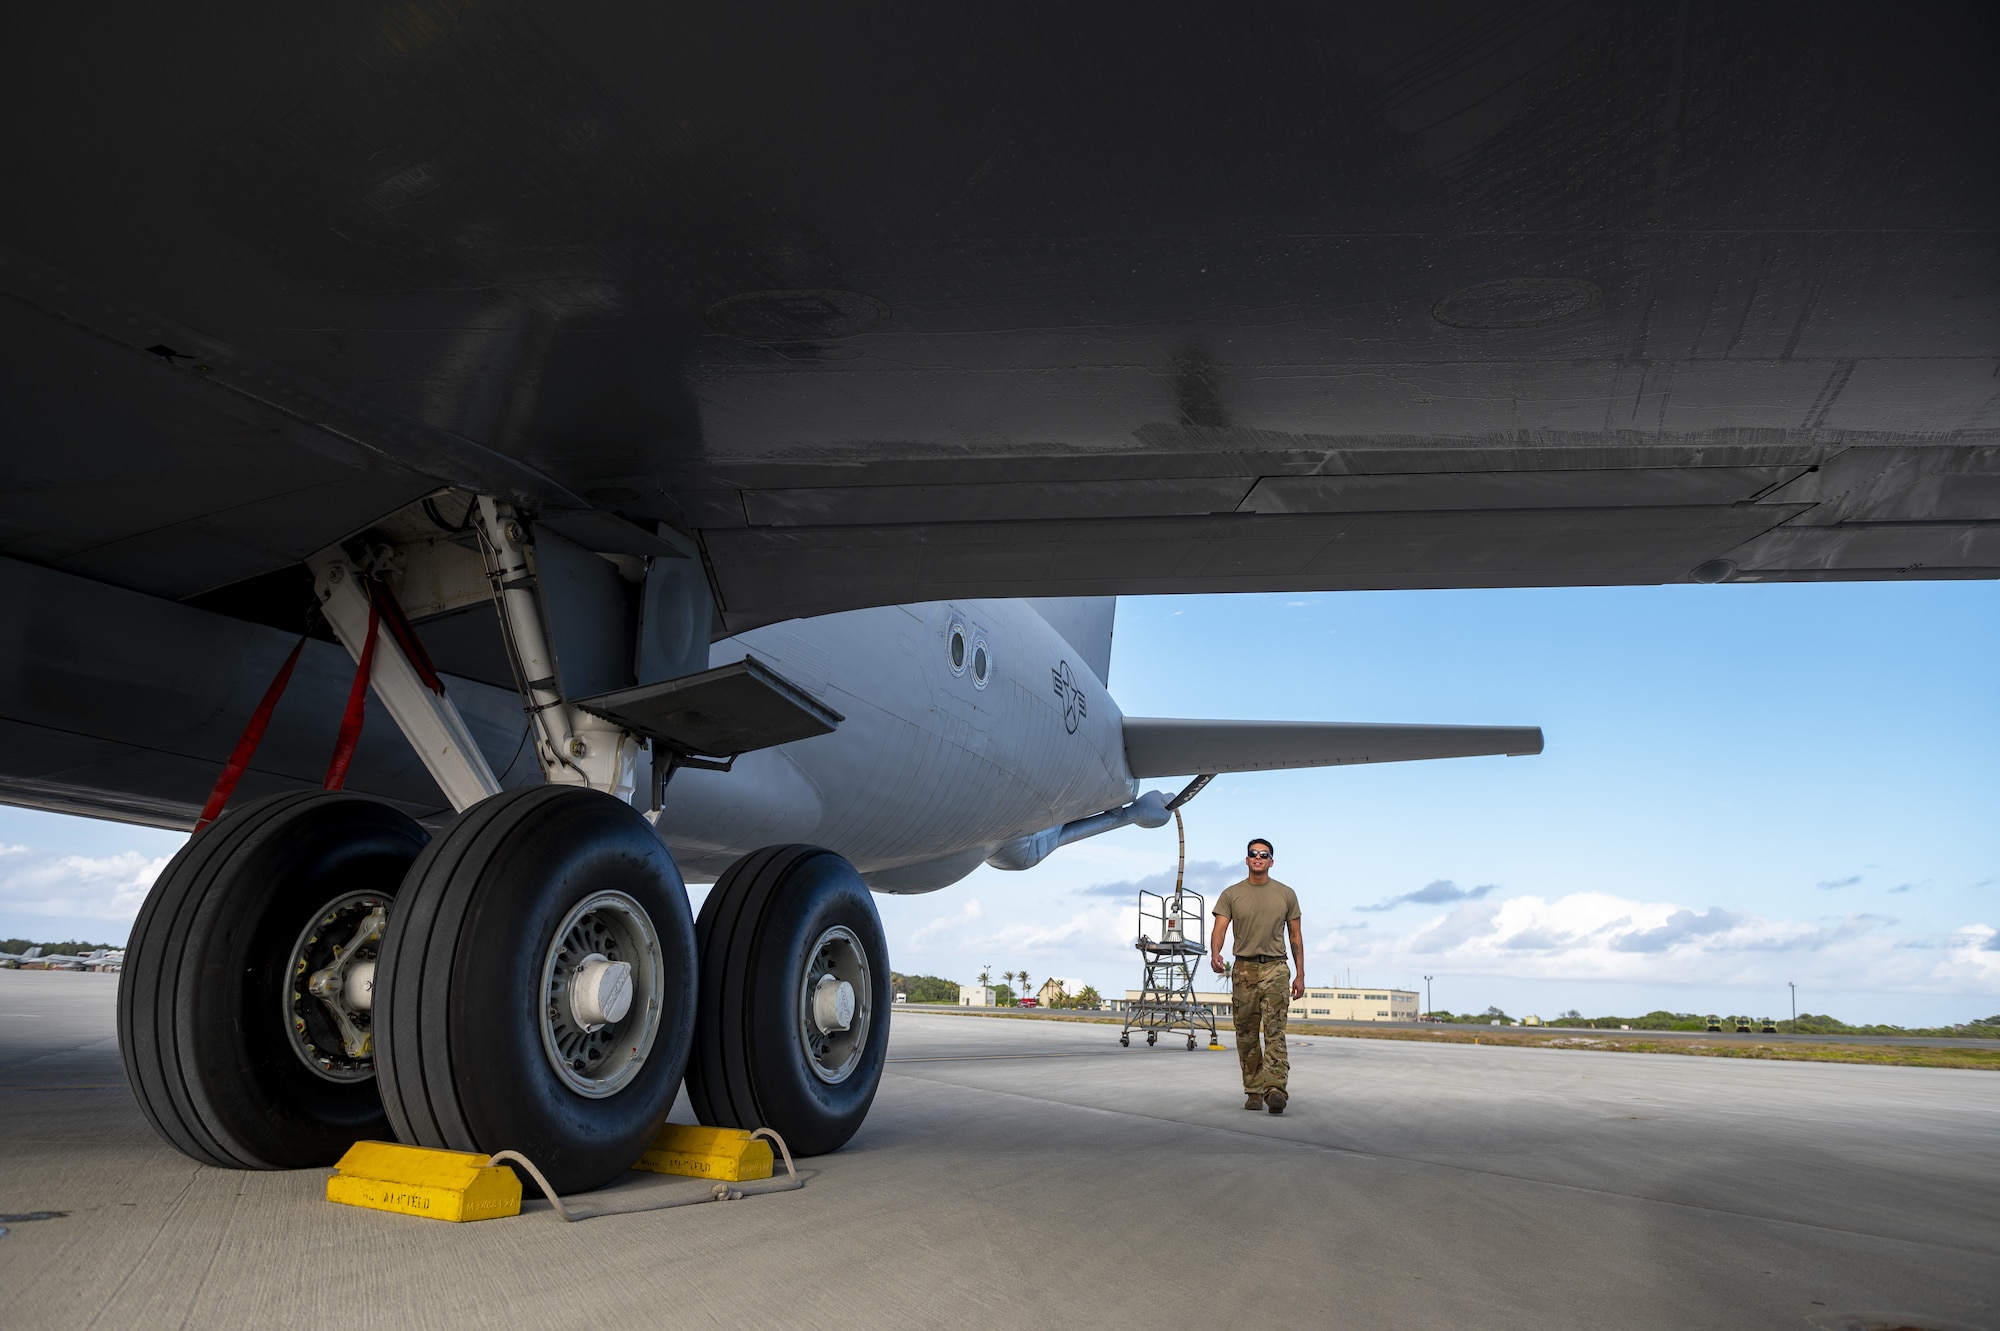 U.S. Air Force Tech. Sgt. Max Ramos, 92nd Aircraft Maintenance Squadron flying crew chief, performs a post-flight inspection following an air refueling coronet mission with U.S. Marine Corps F/A-18C Hornets, March 9, 2023. Aircrew from the 384th Air Refueling Squadron conducted an air refueling coronet with Marines from the Marine Fighter Attack Squadron 312, demonstrating the critical role mobility forces have in projecting the joint force anywhere, anytime. (U.S. Air Force photo by Staff Sgt. Lawrence Sena)